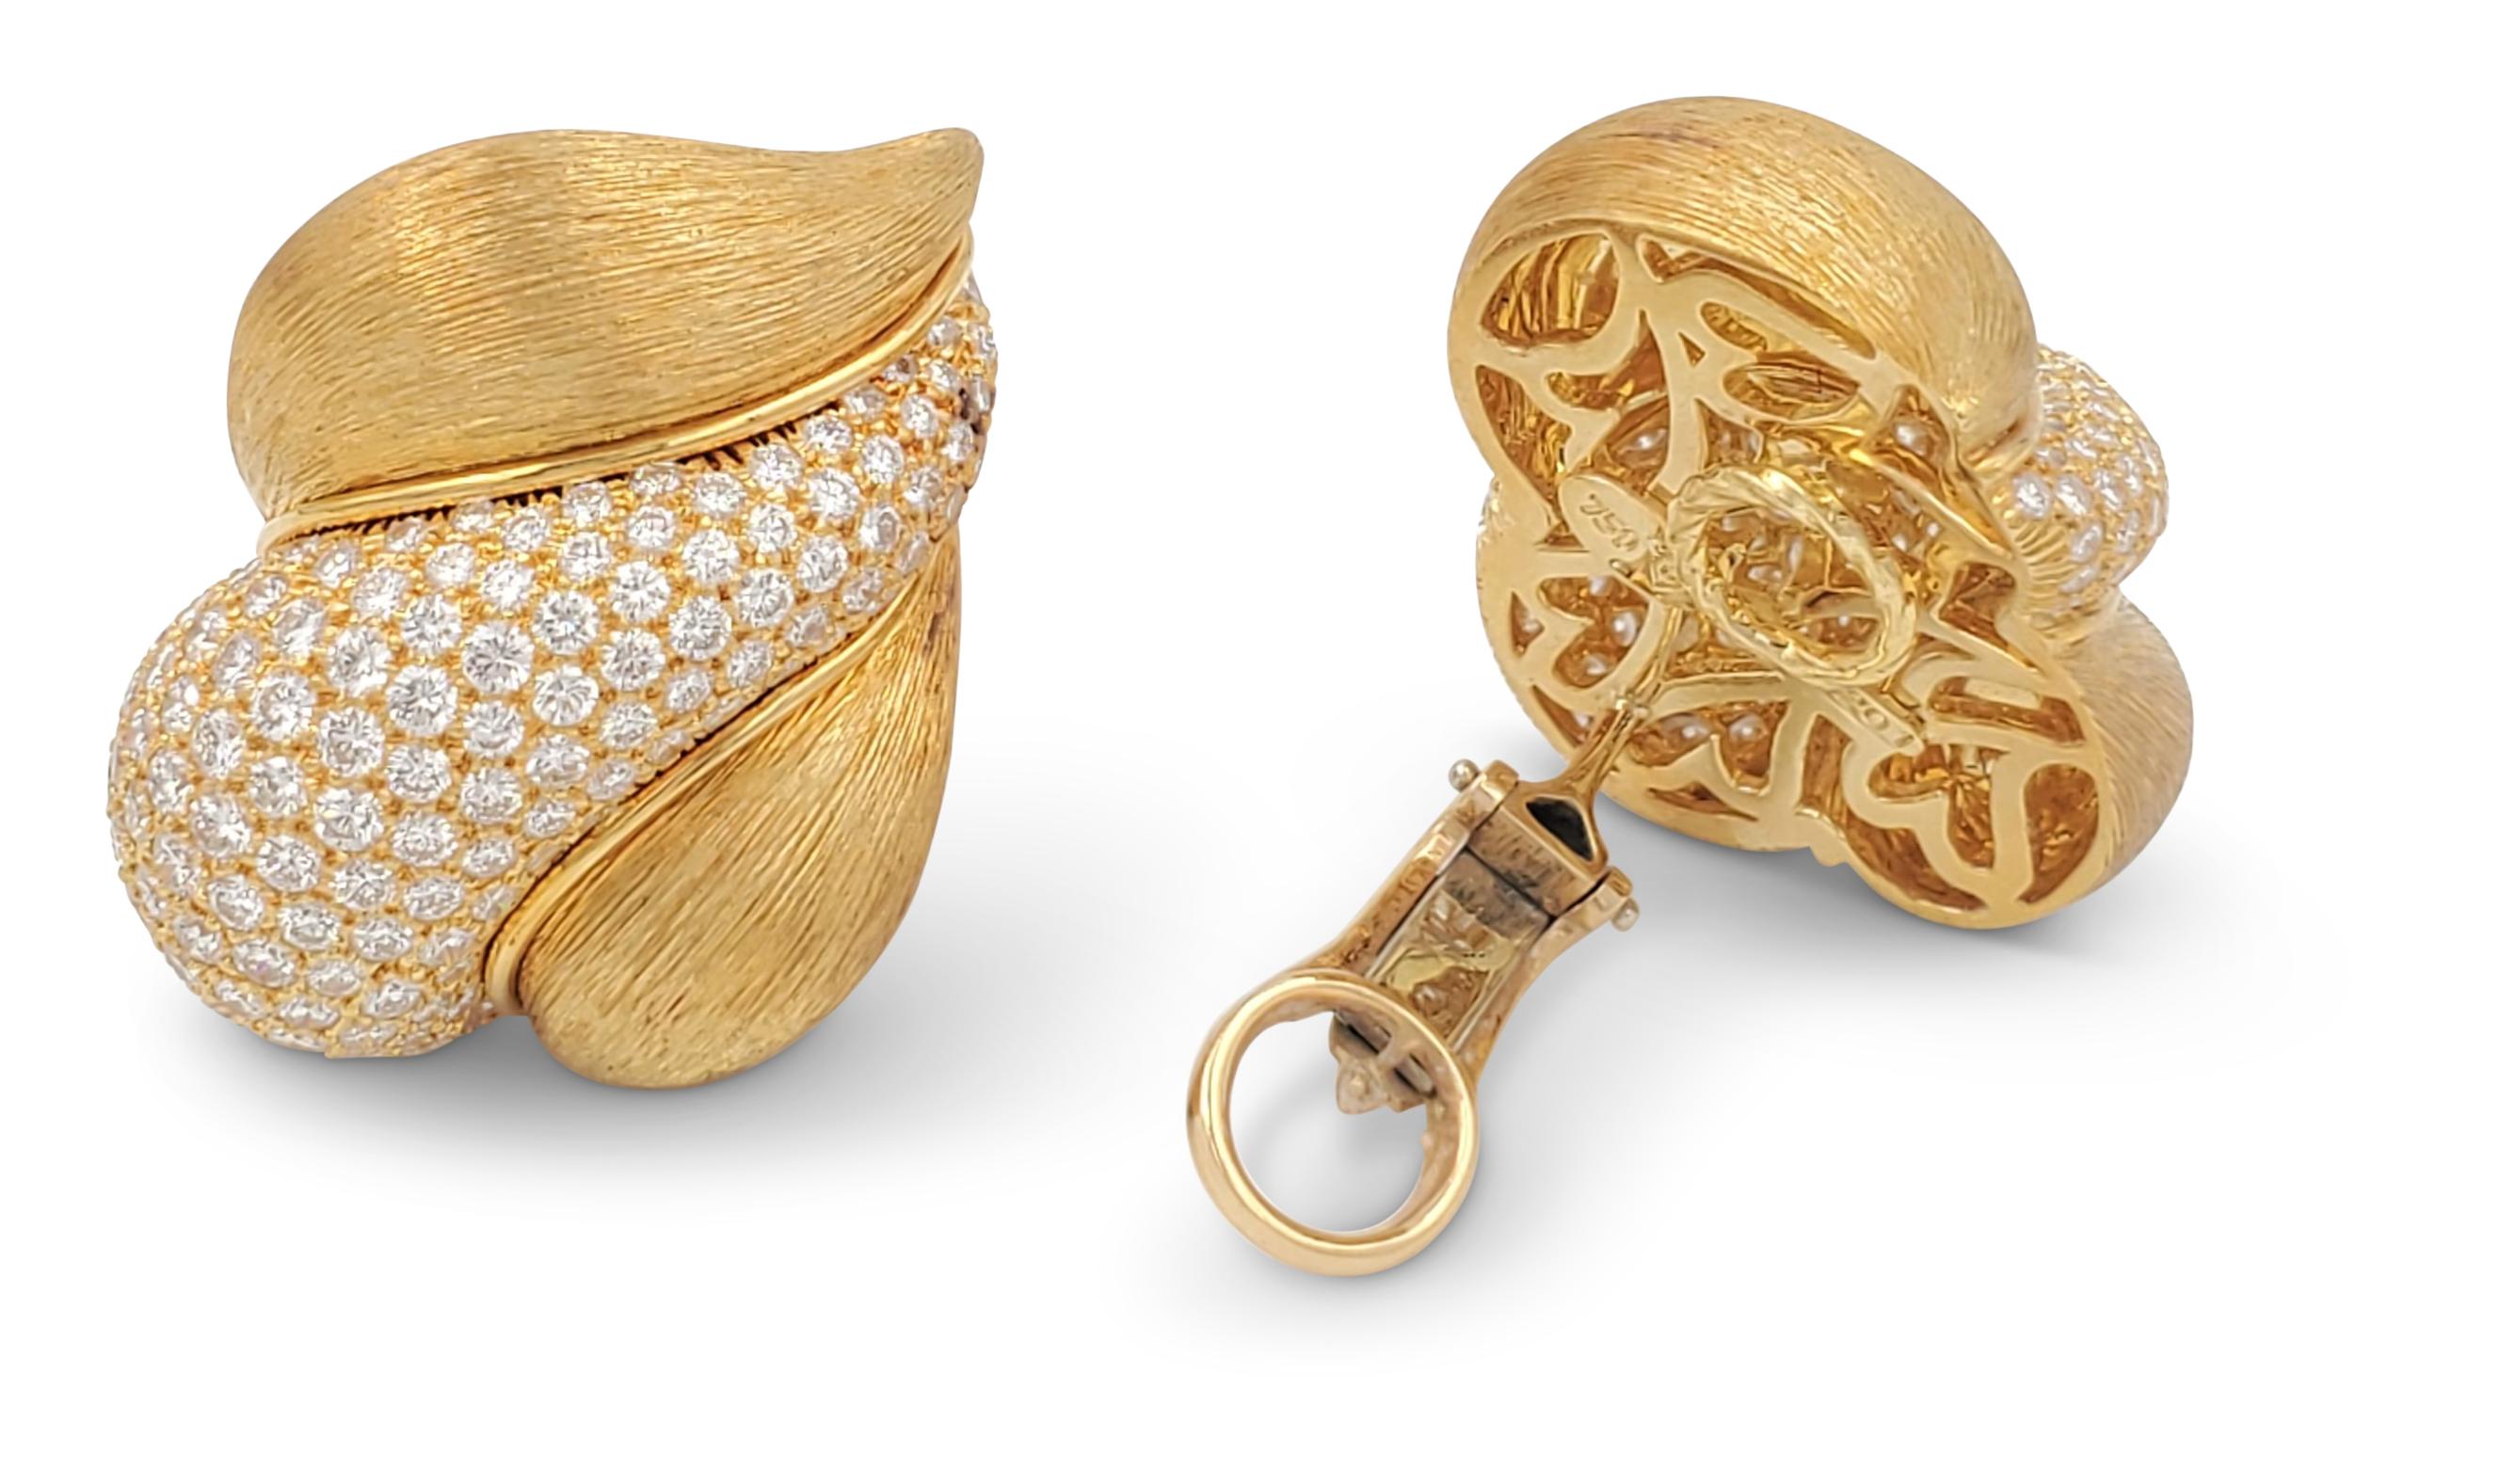 Striking vintage Henry Dunay earrings crafted in brushed 18 karat yellow gold and pave set with an estimated 6.65 carats of high quality (E-F color, VS clarity) round brilliant cut diamonds. Signed Dunay, maker's mark for Henry Dunay, 18K, 750. Clip